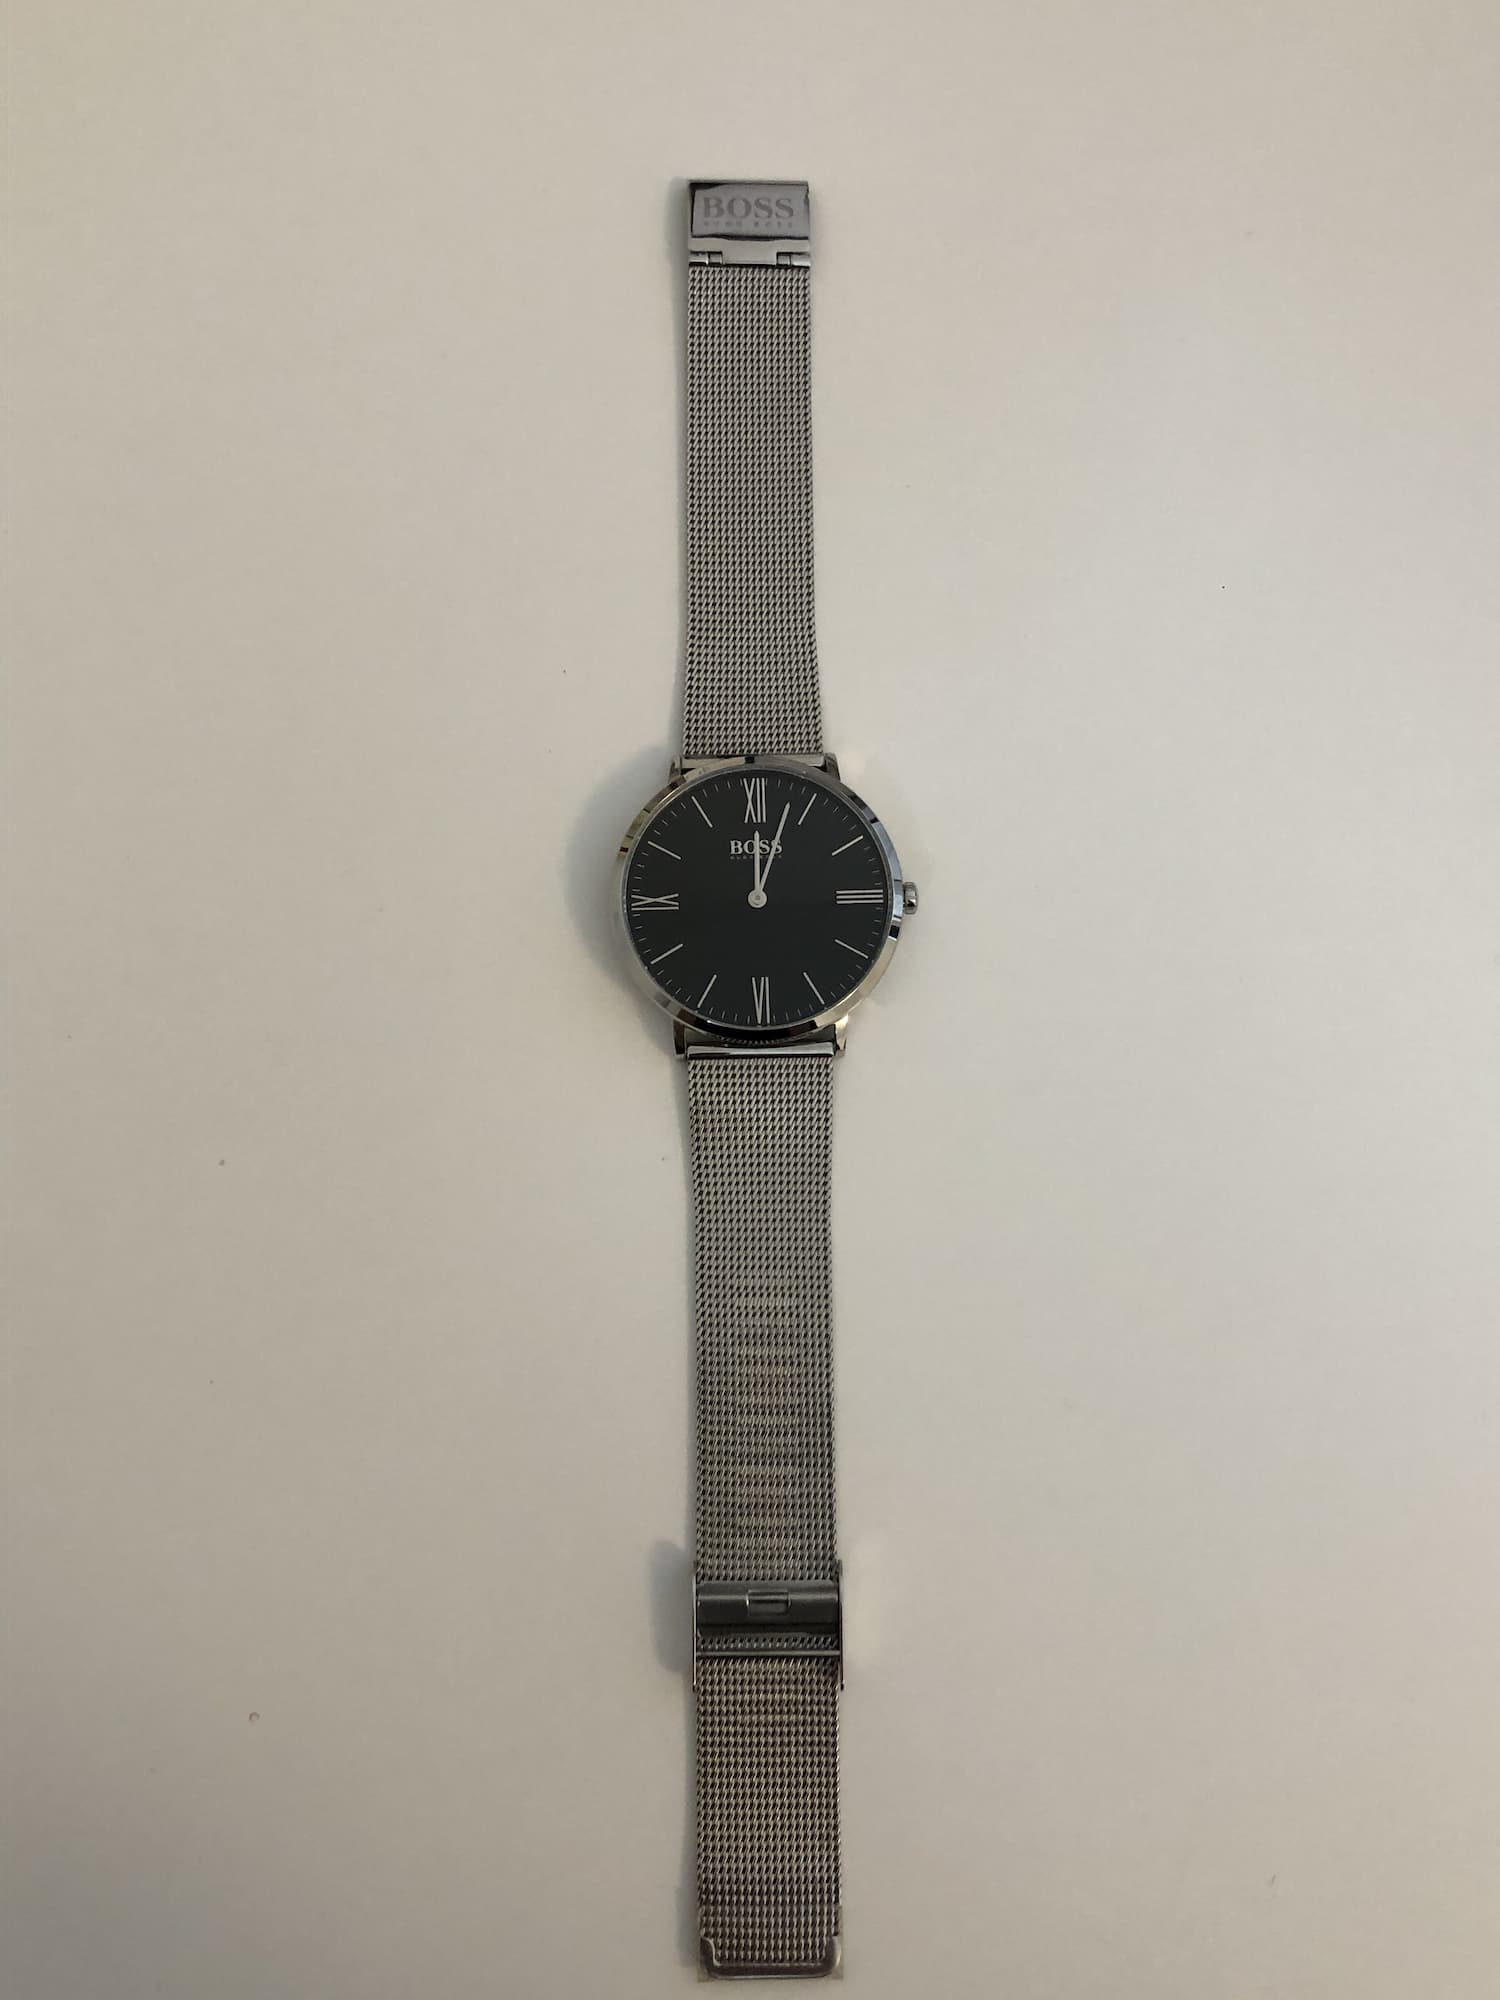 Hugo Boss Gents Stainless Steel Watch HB 286.1.14.2893 - The Watch Cabinet